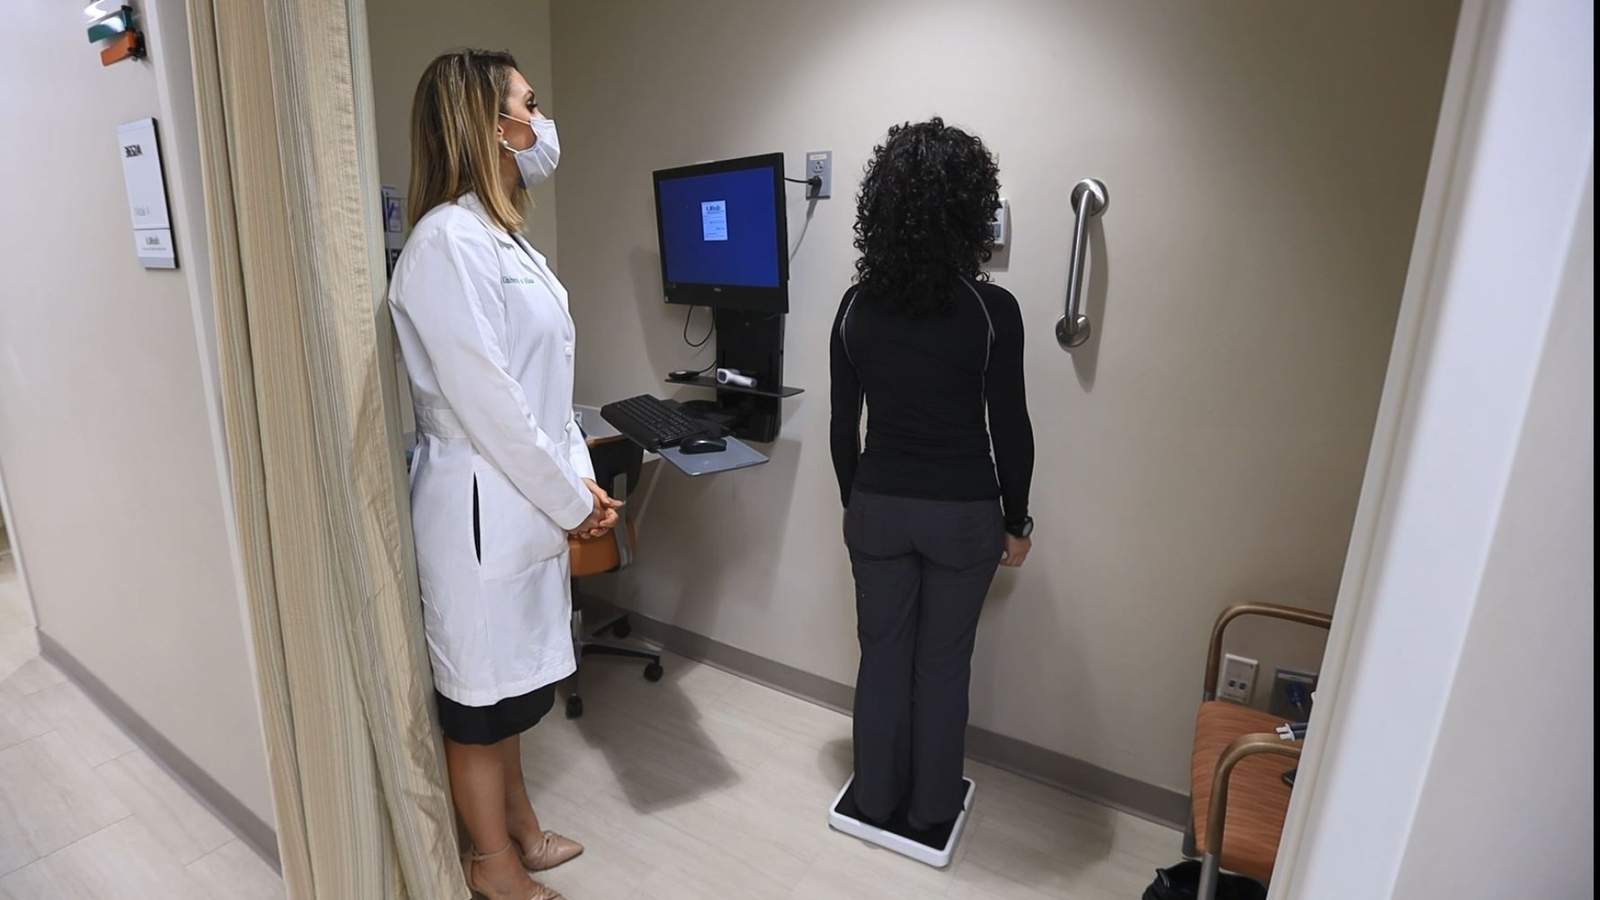 UHealth Doctor Offers Comprehensive Weight Management Program to Her Patients